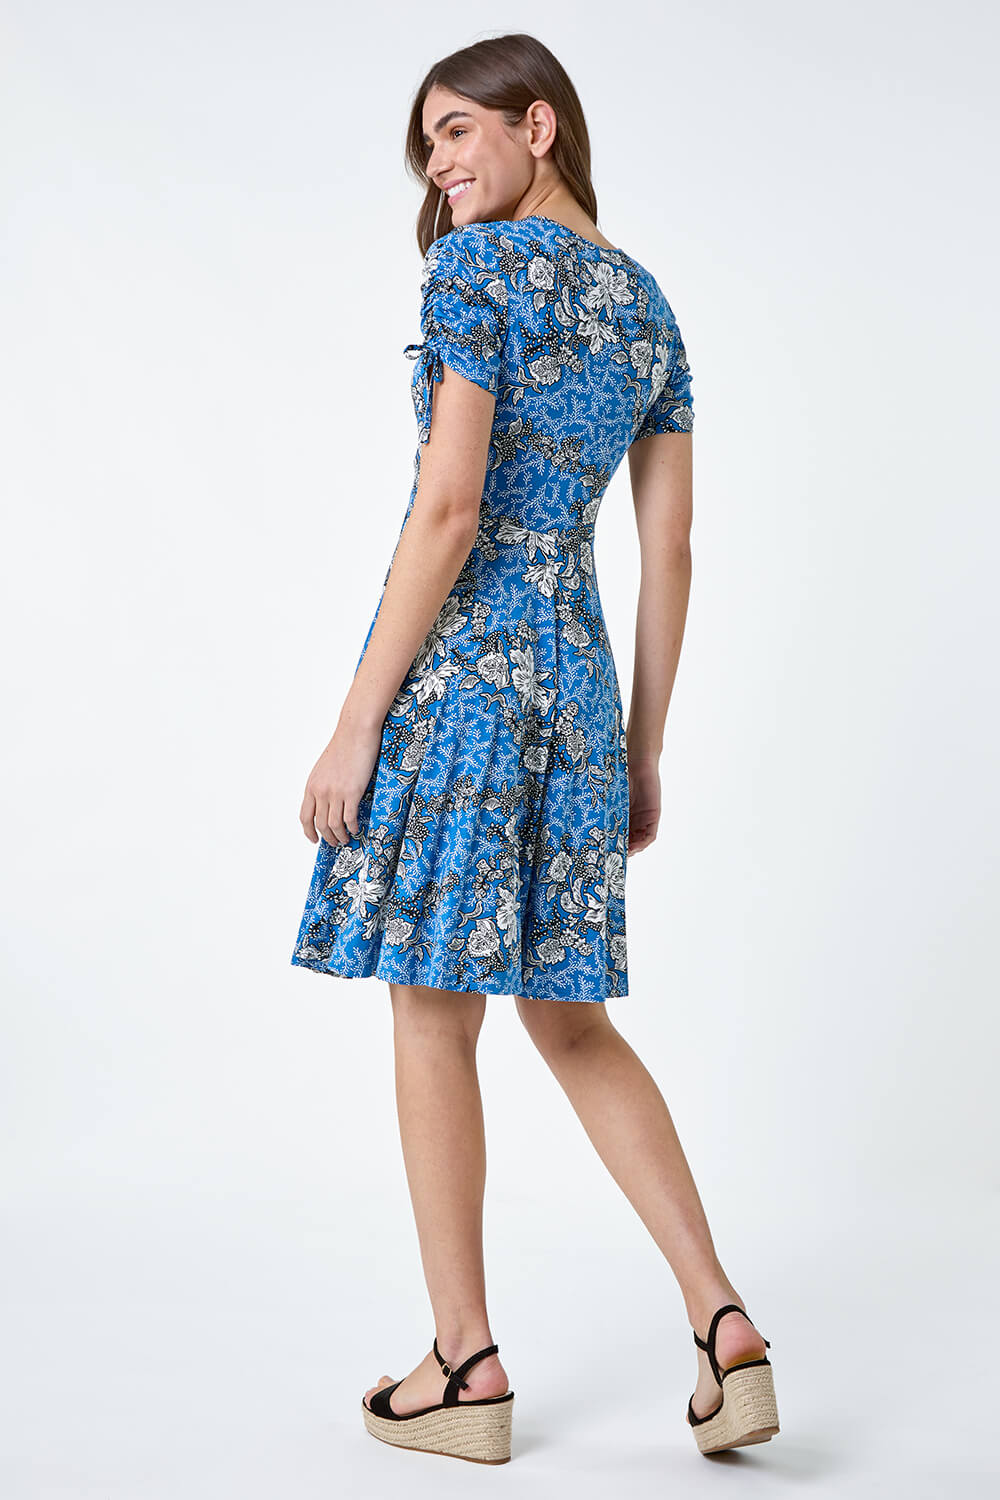 Blue Floral Gathered Tie Detail Stretch Dress, Image 3 of 5